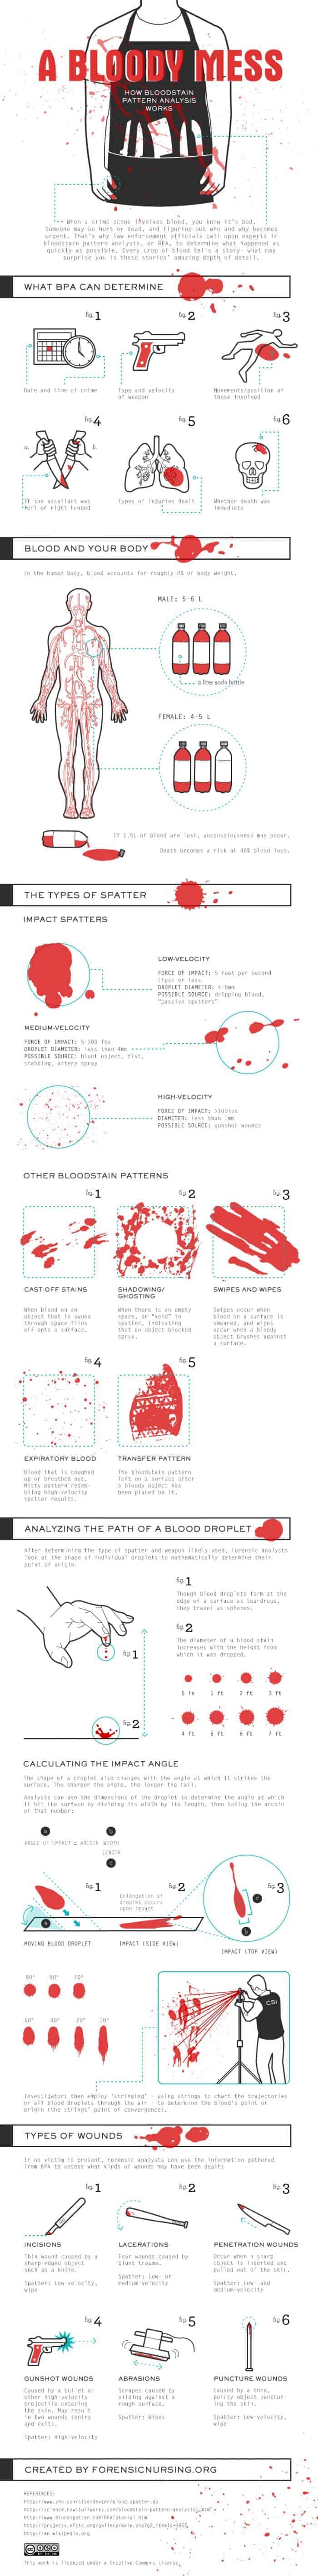 Bloody Mess Infographic